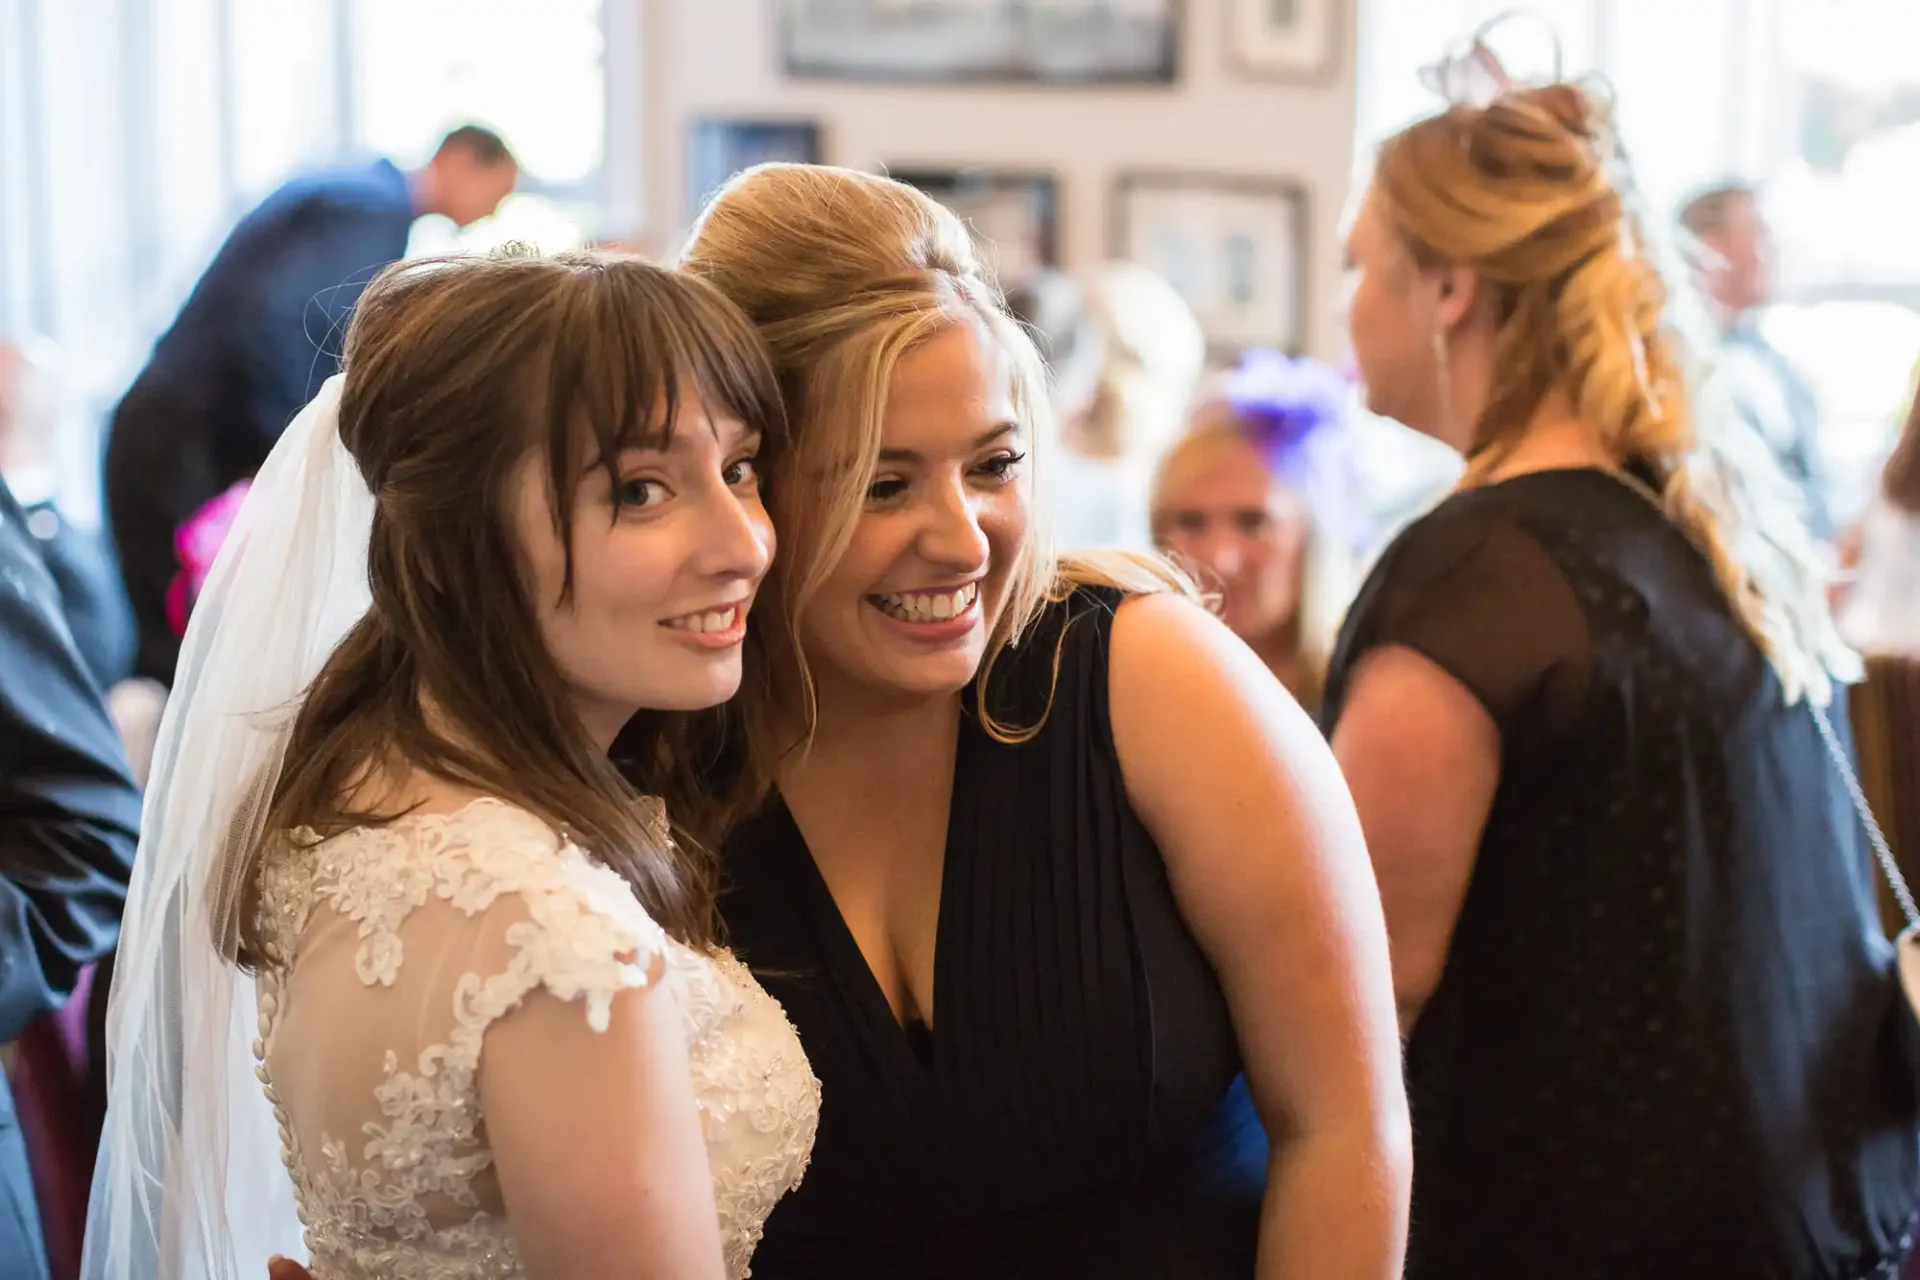 A bride in a white dress and a woman in a black dress smiling together at a wedding reception.